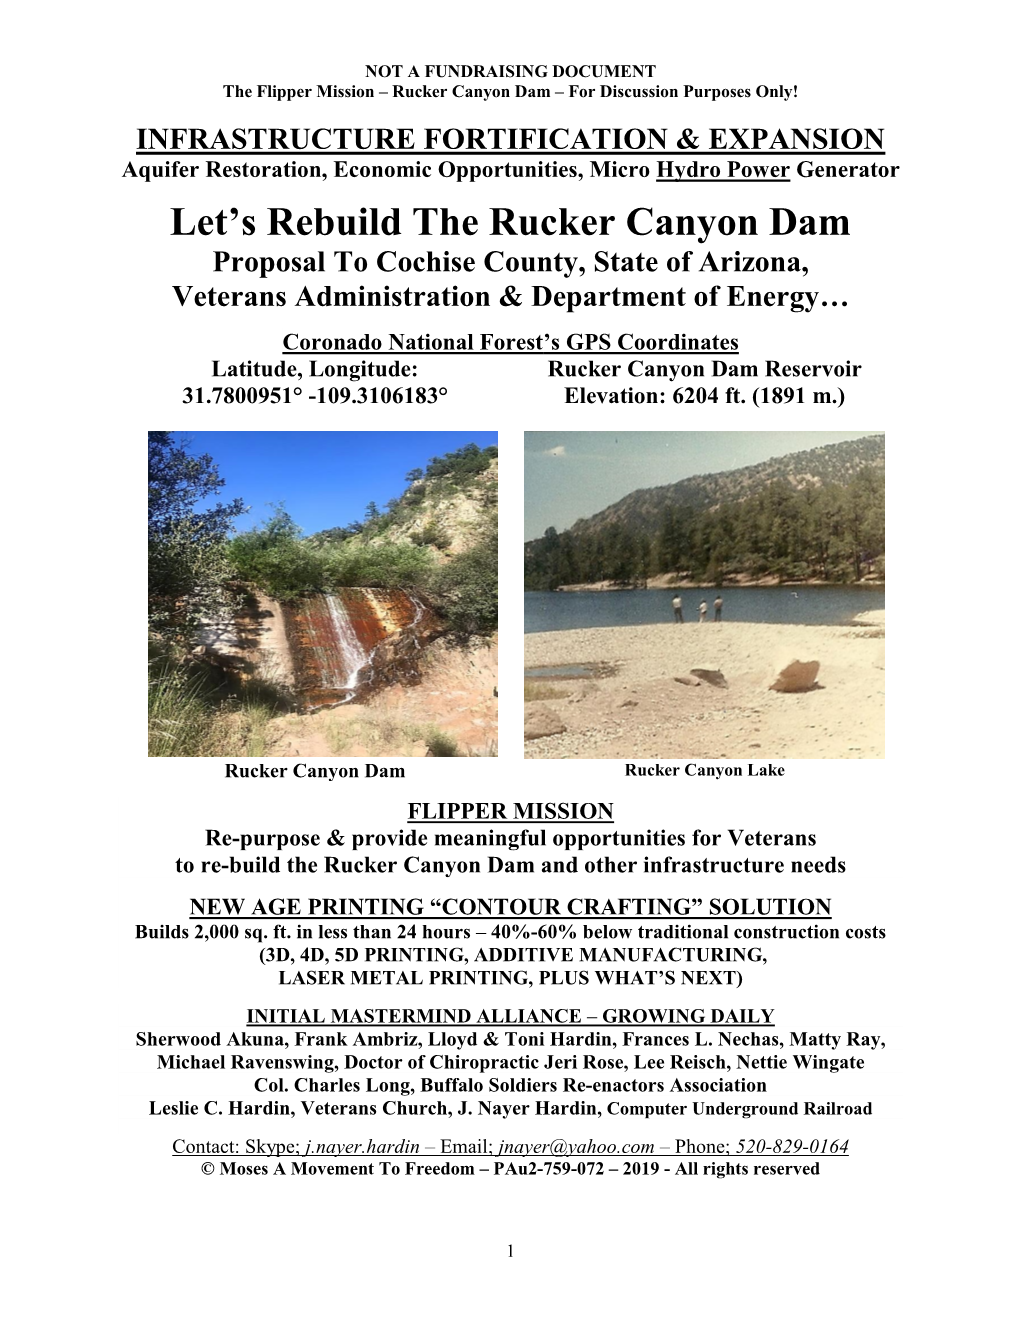 Let's Rebuild the Rucker Canyon